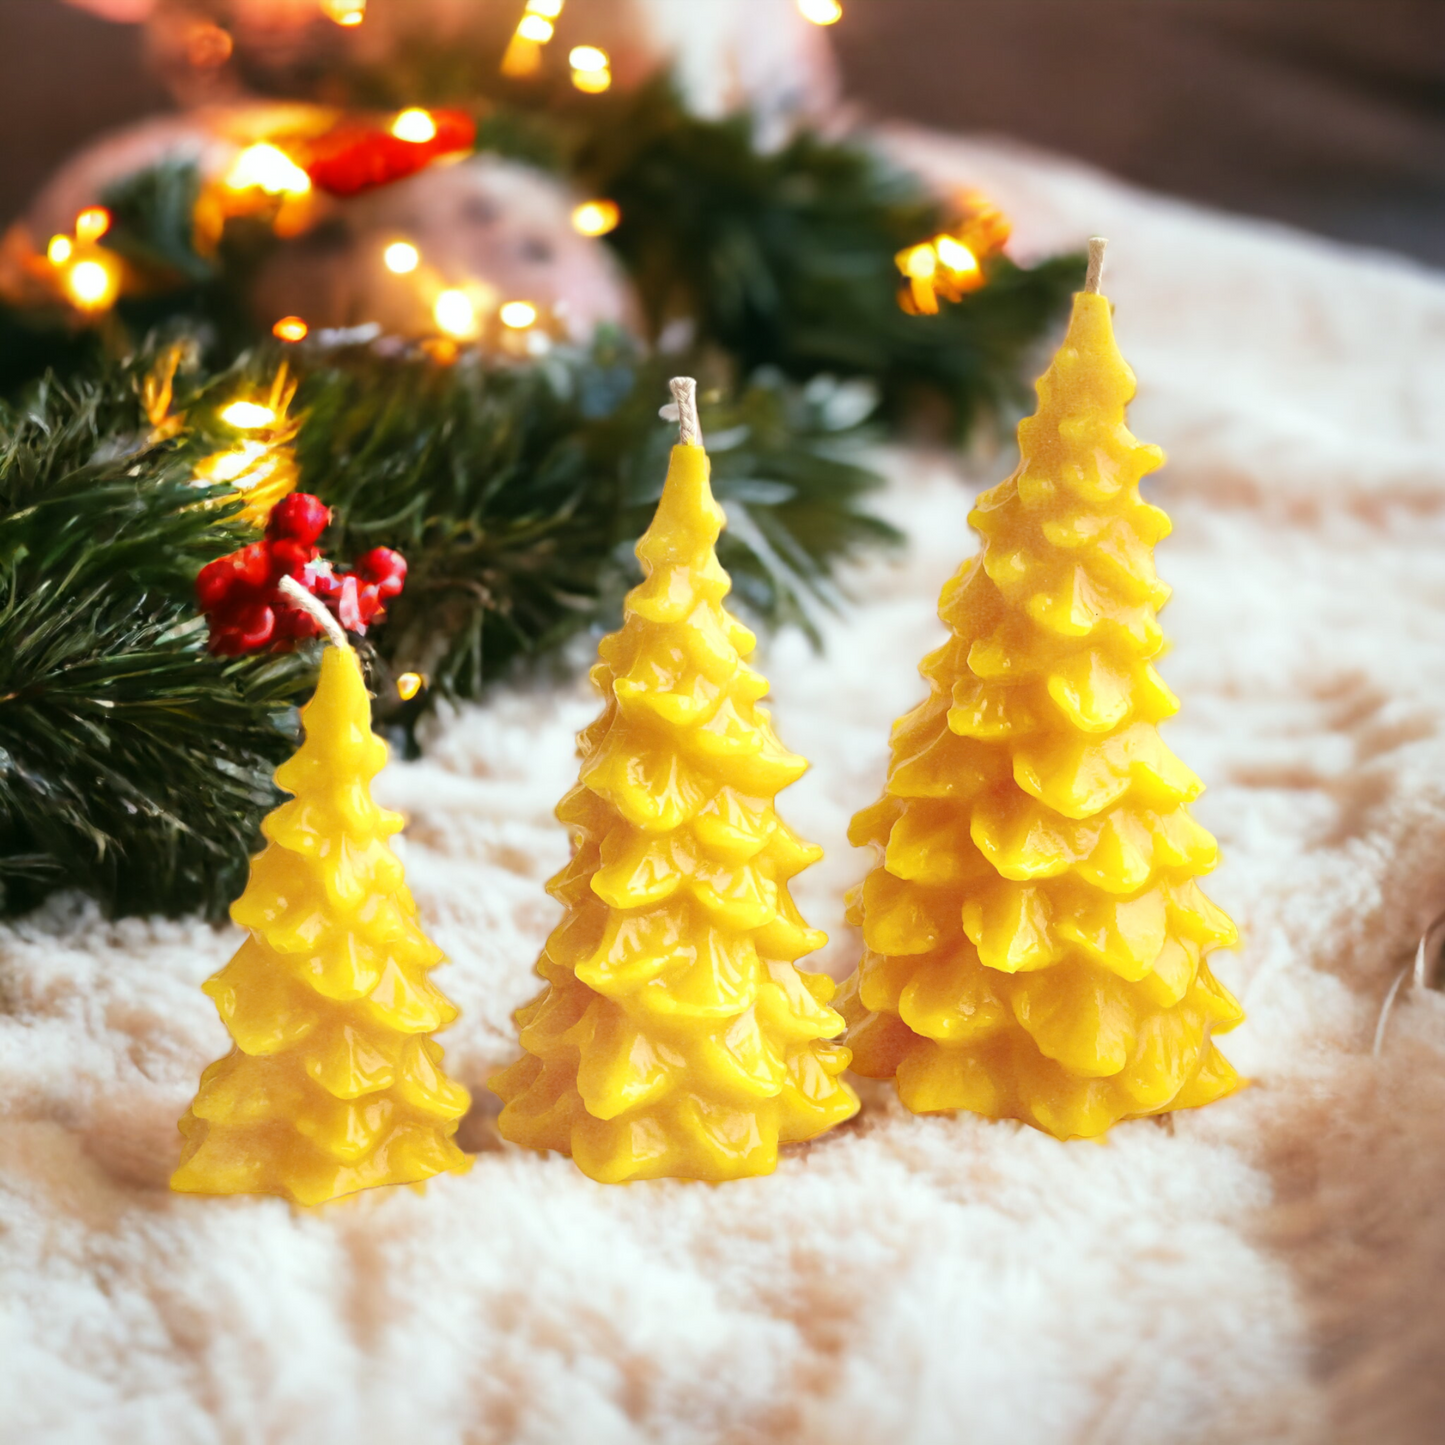 Christmas Tree Pure Beeswax Candles